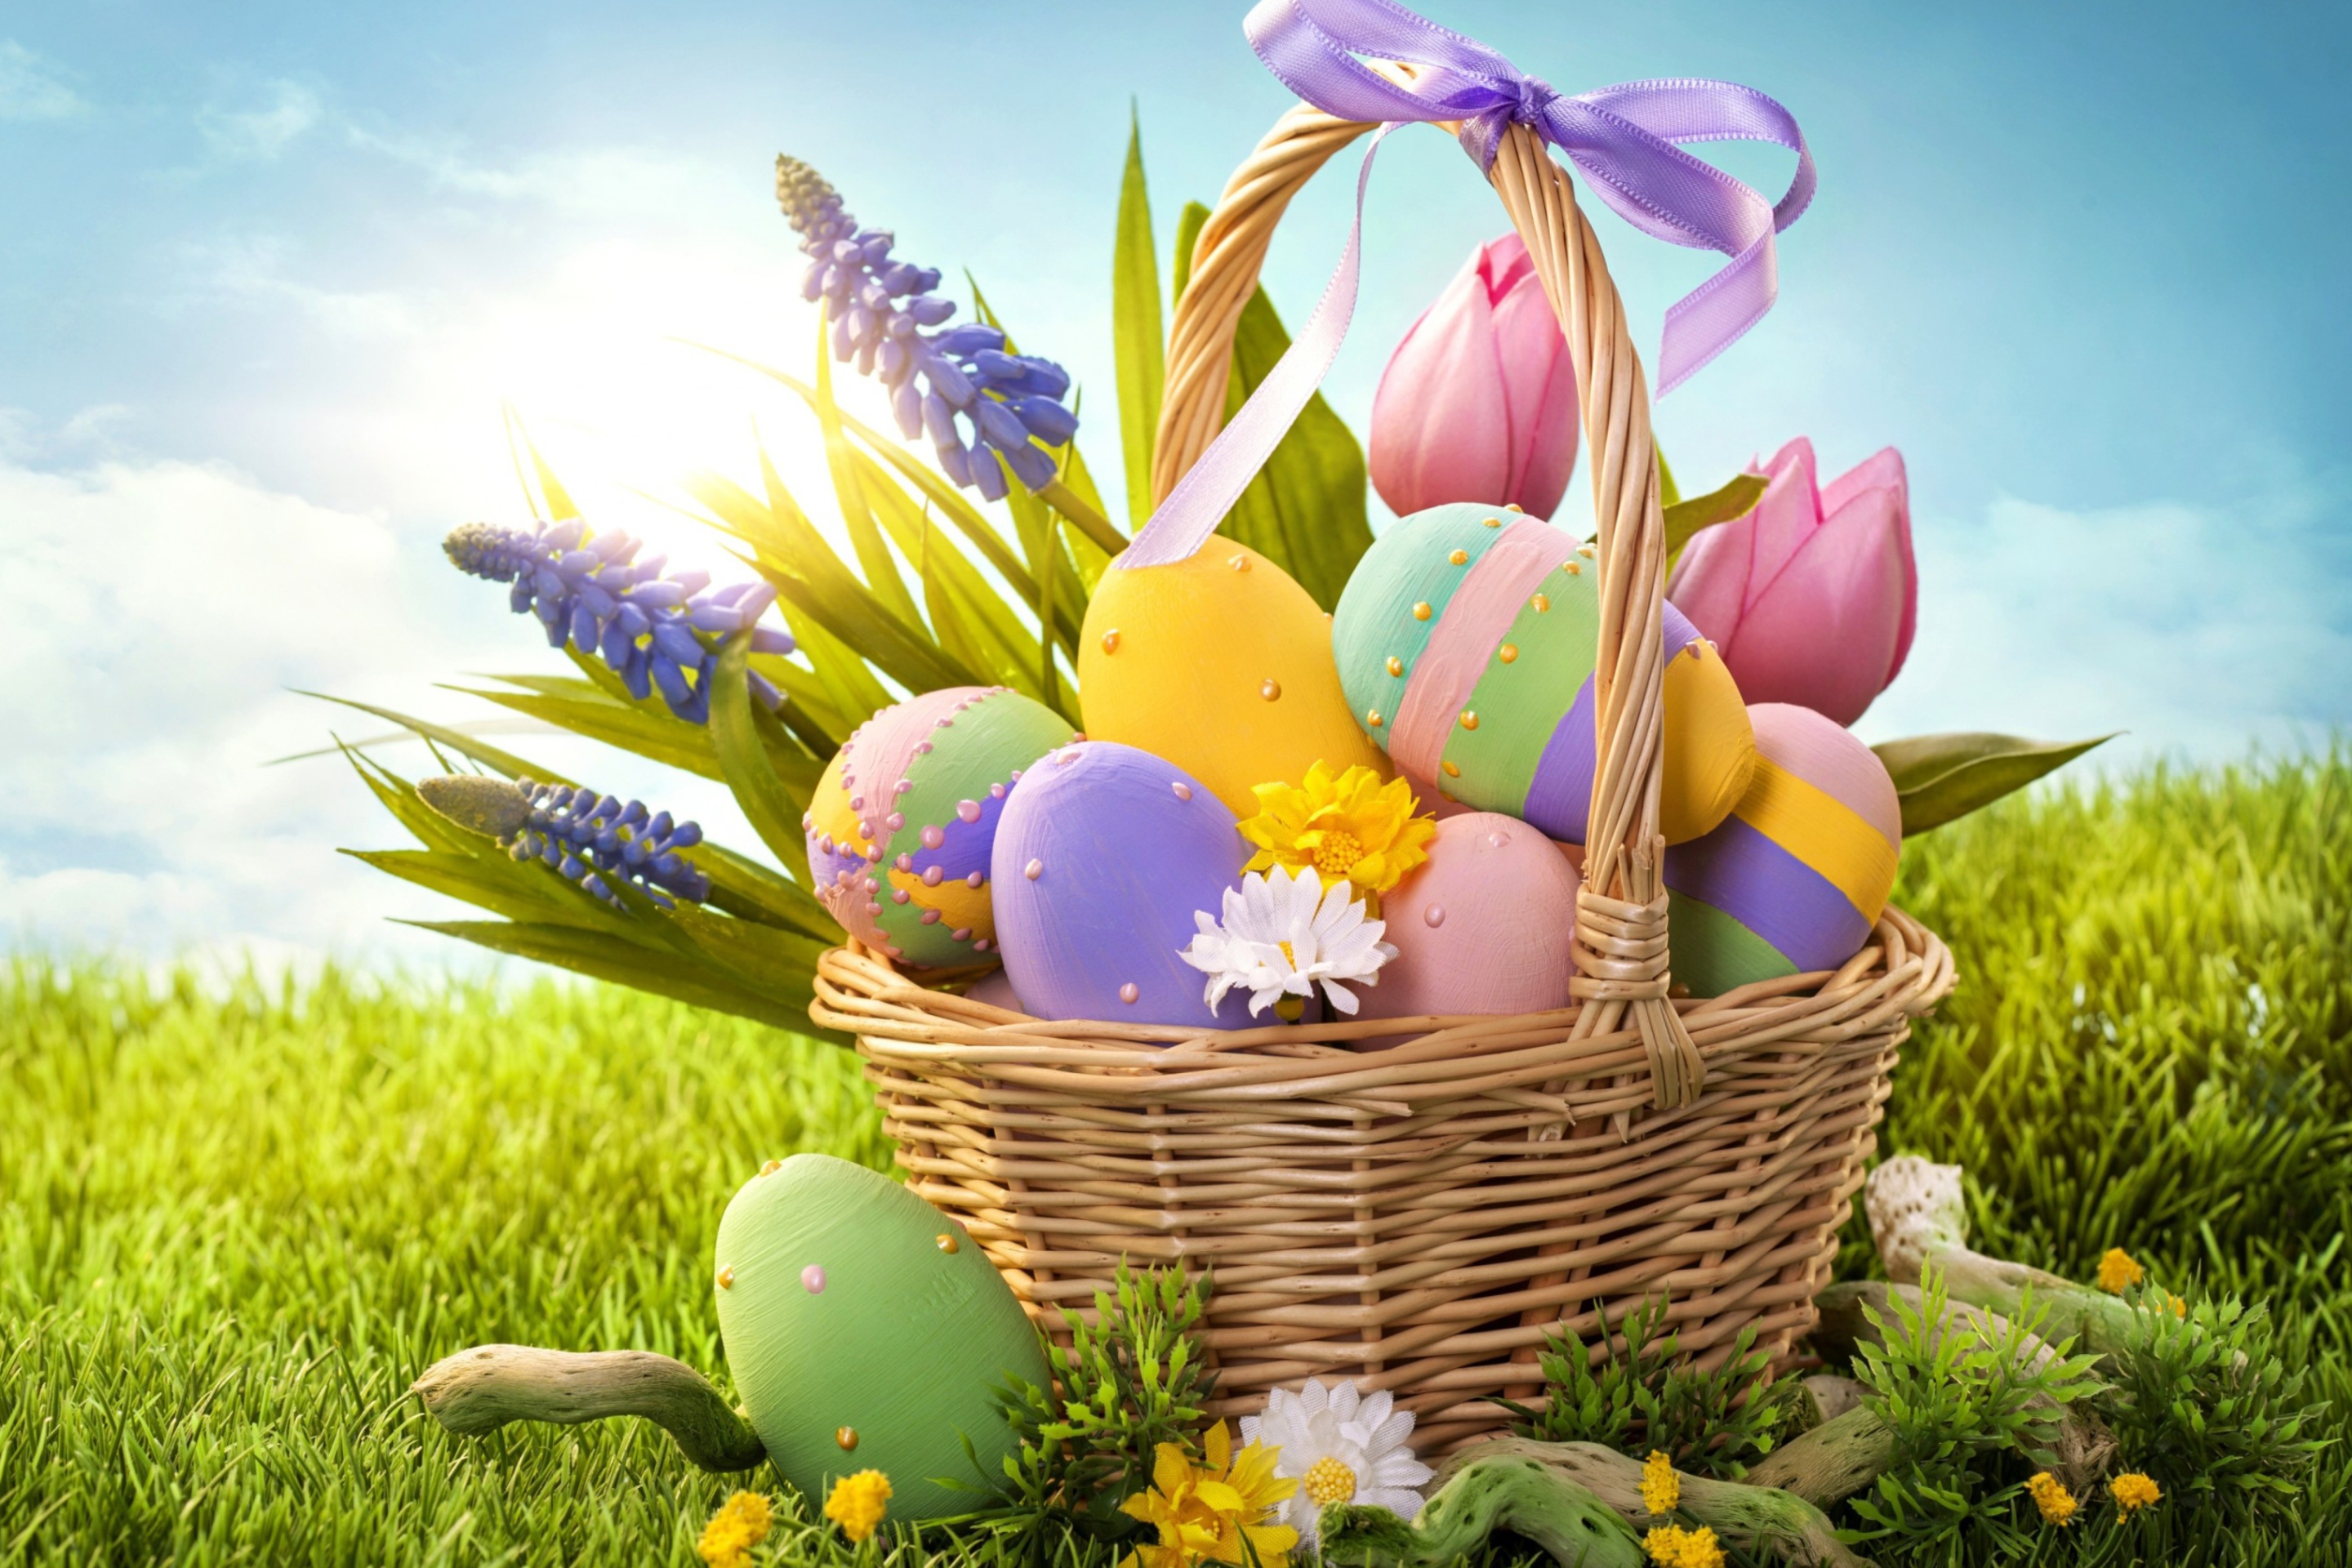 Basket With Easter Eggs wallpaper 2880x1920